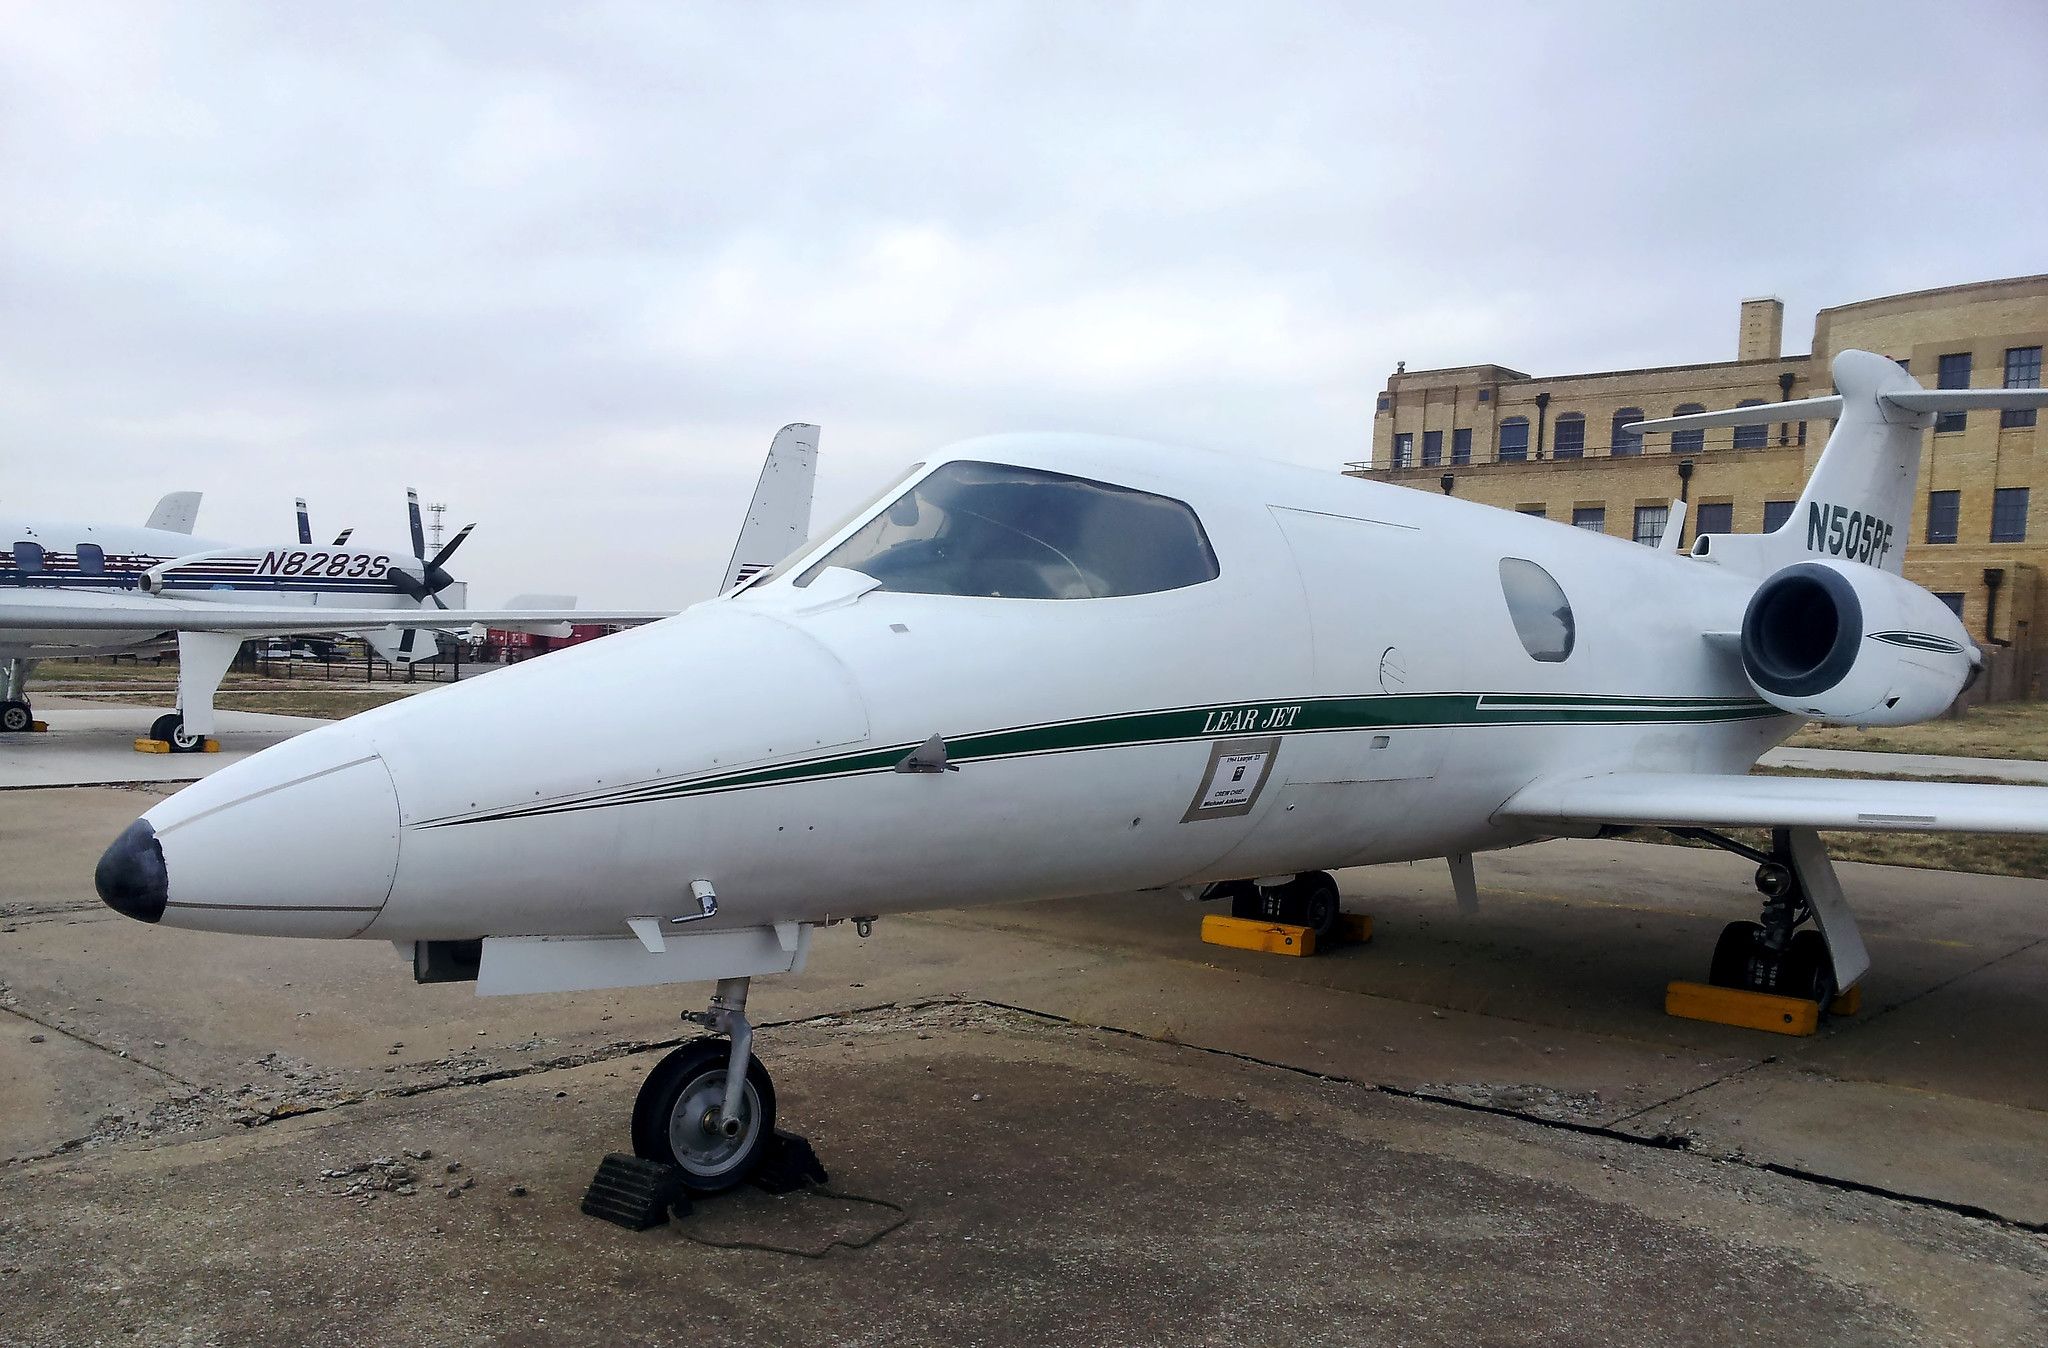 Cessna built the 500 Fanjet to compete with the Learjet 23